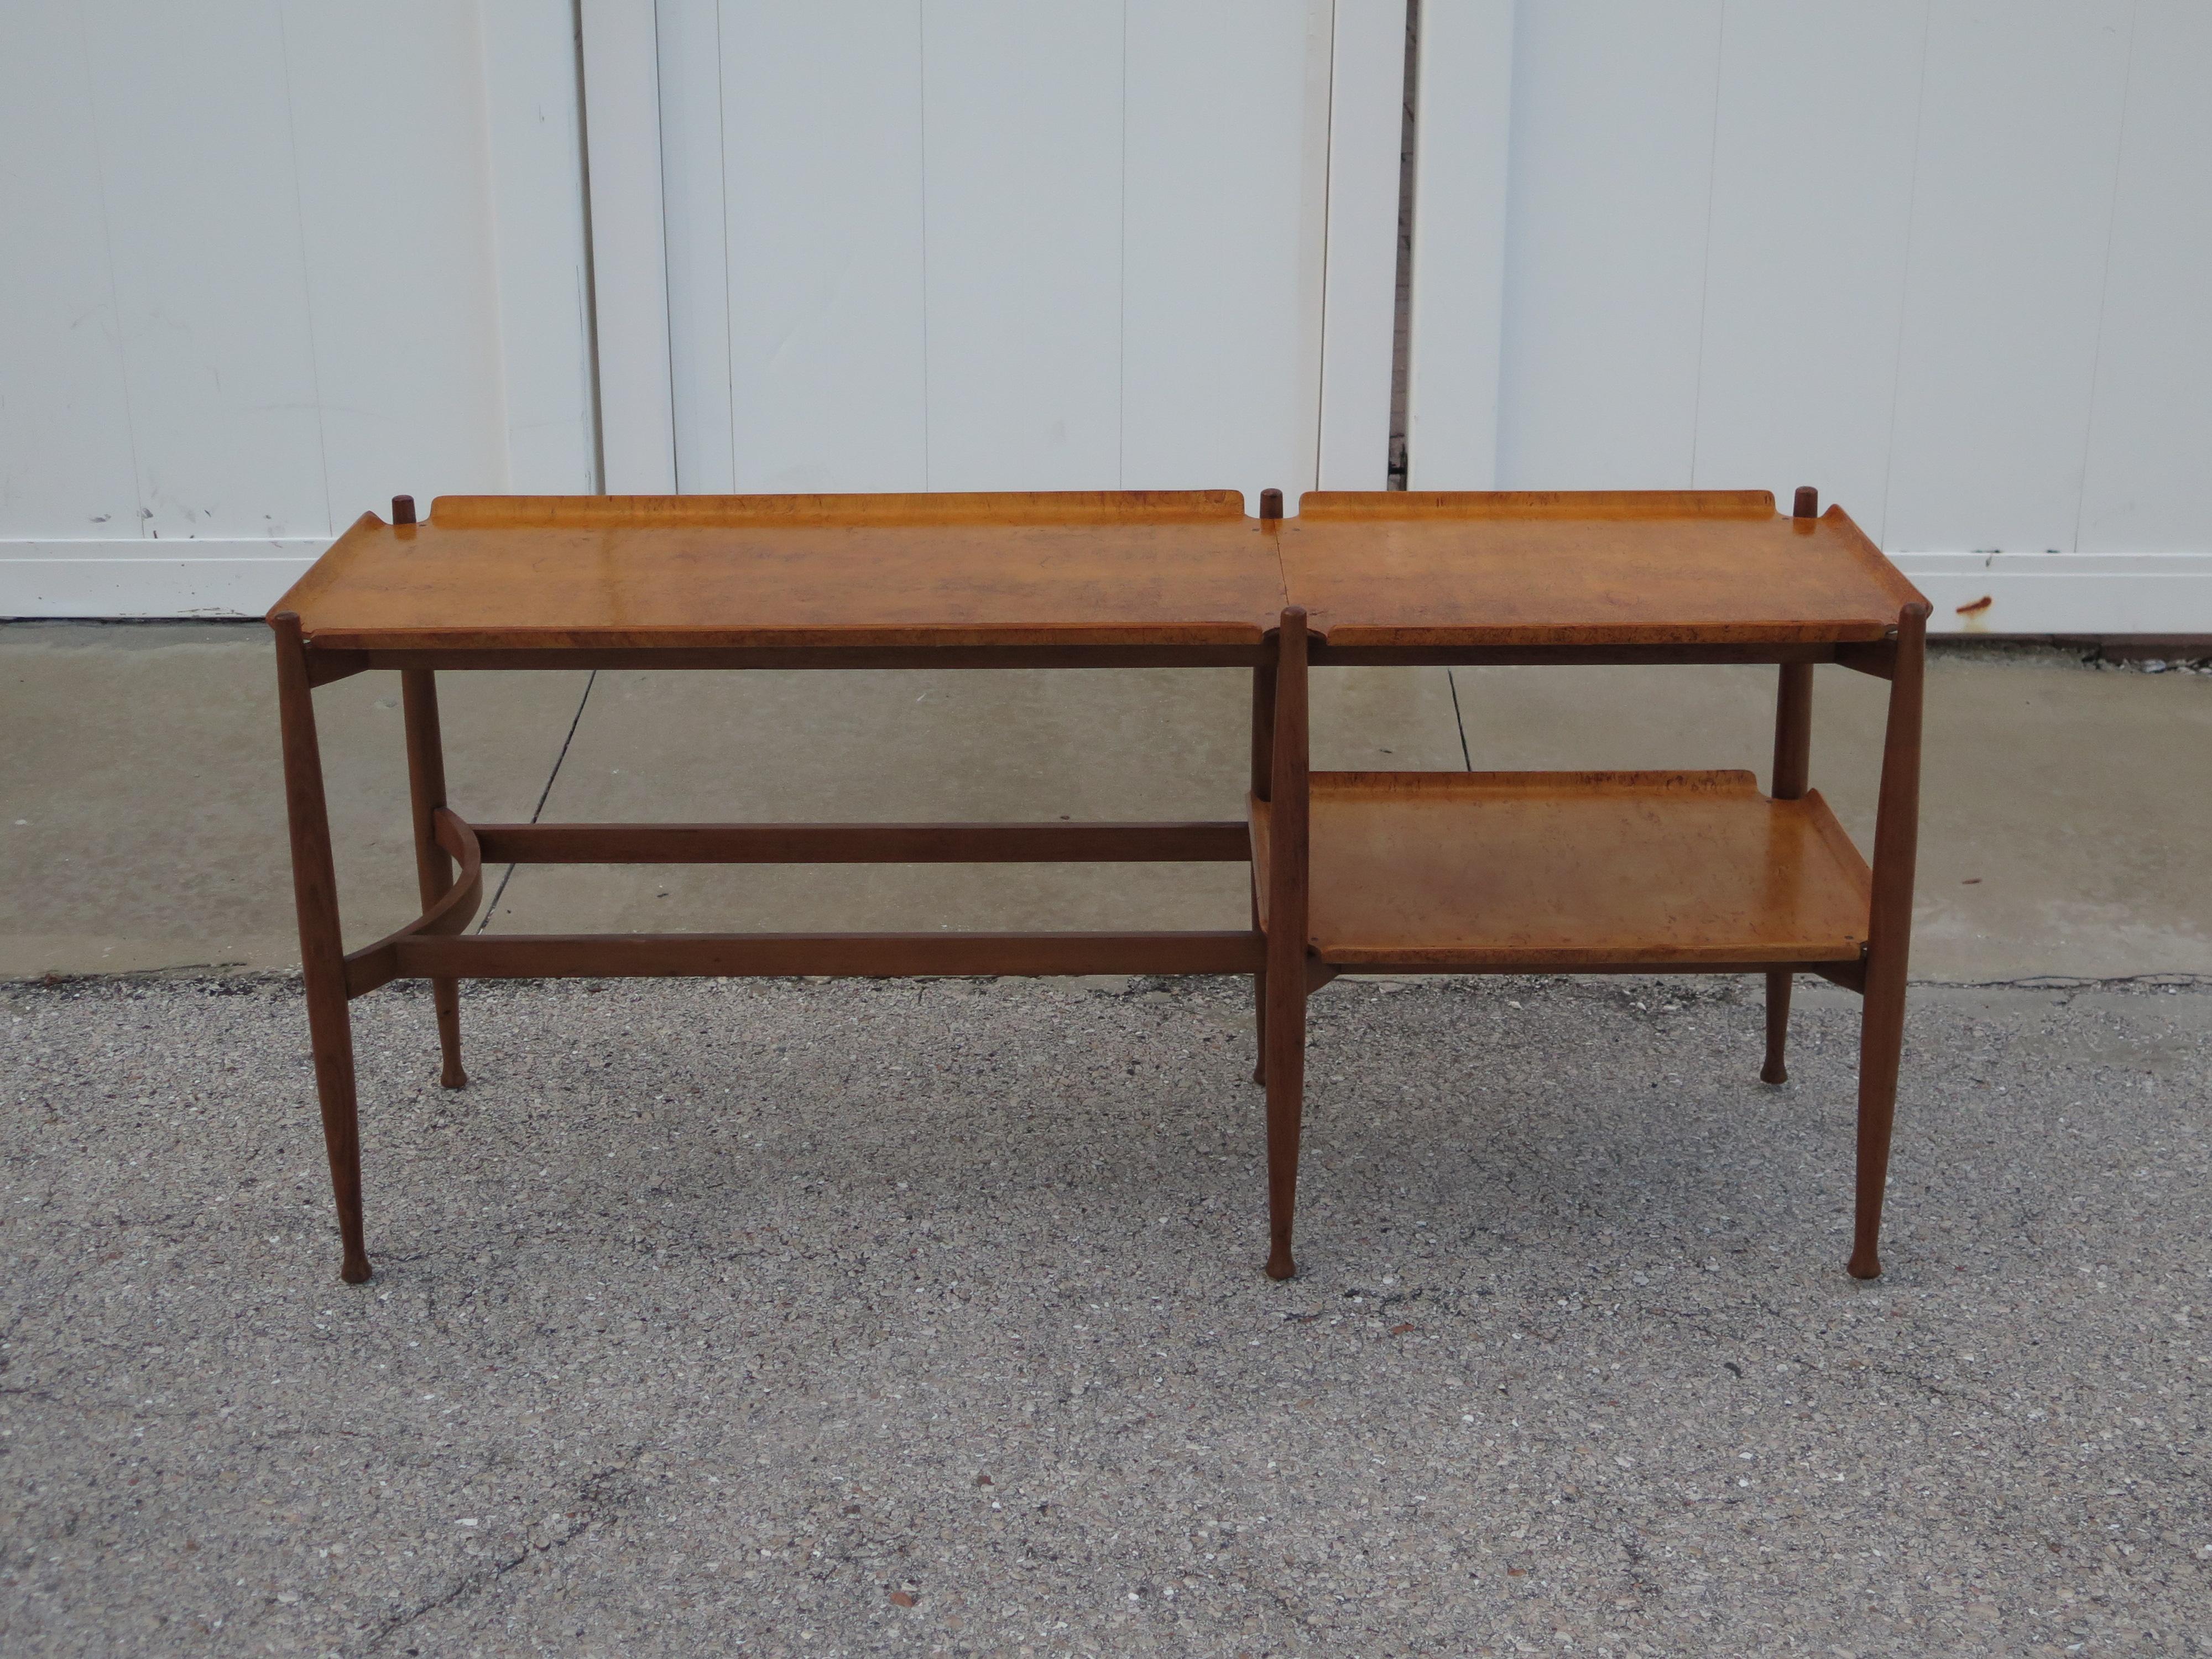 Unusual Dunbar sofa or console table. Made of rosewood and karelian birch. Lower shelf for extra storage.